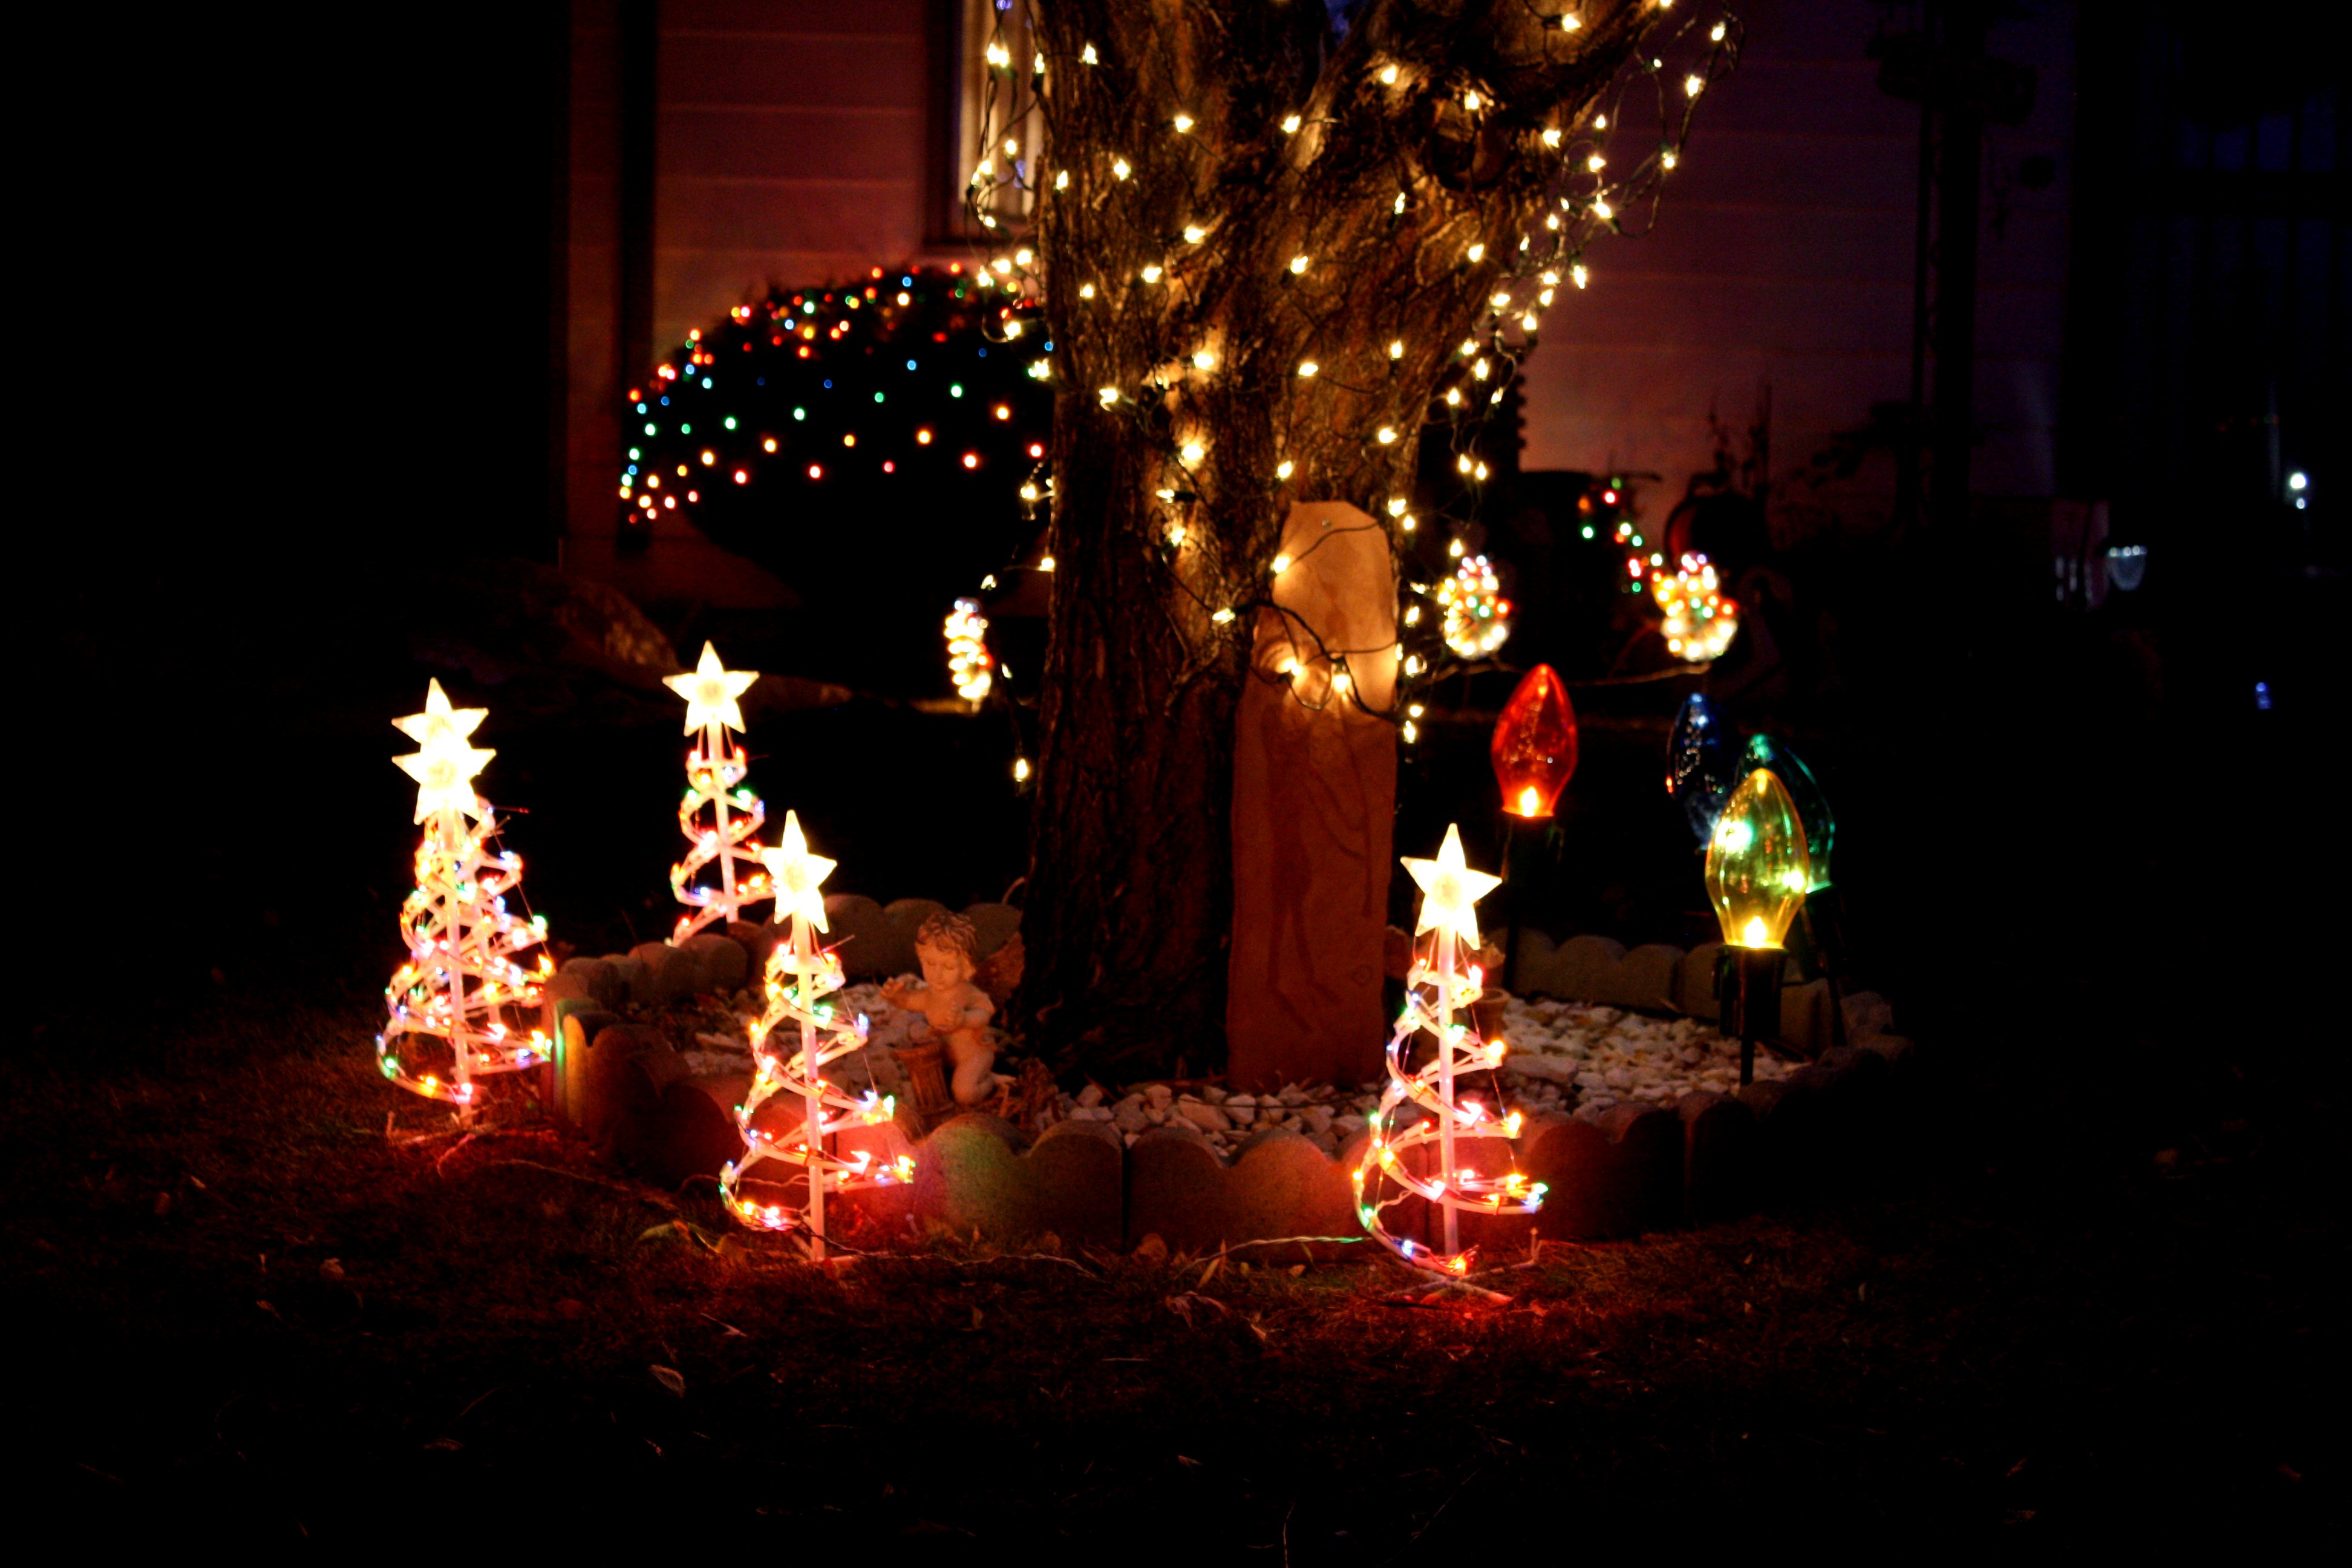 lighted Christmas yard decorations at night including spiral Christmas ...